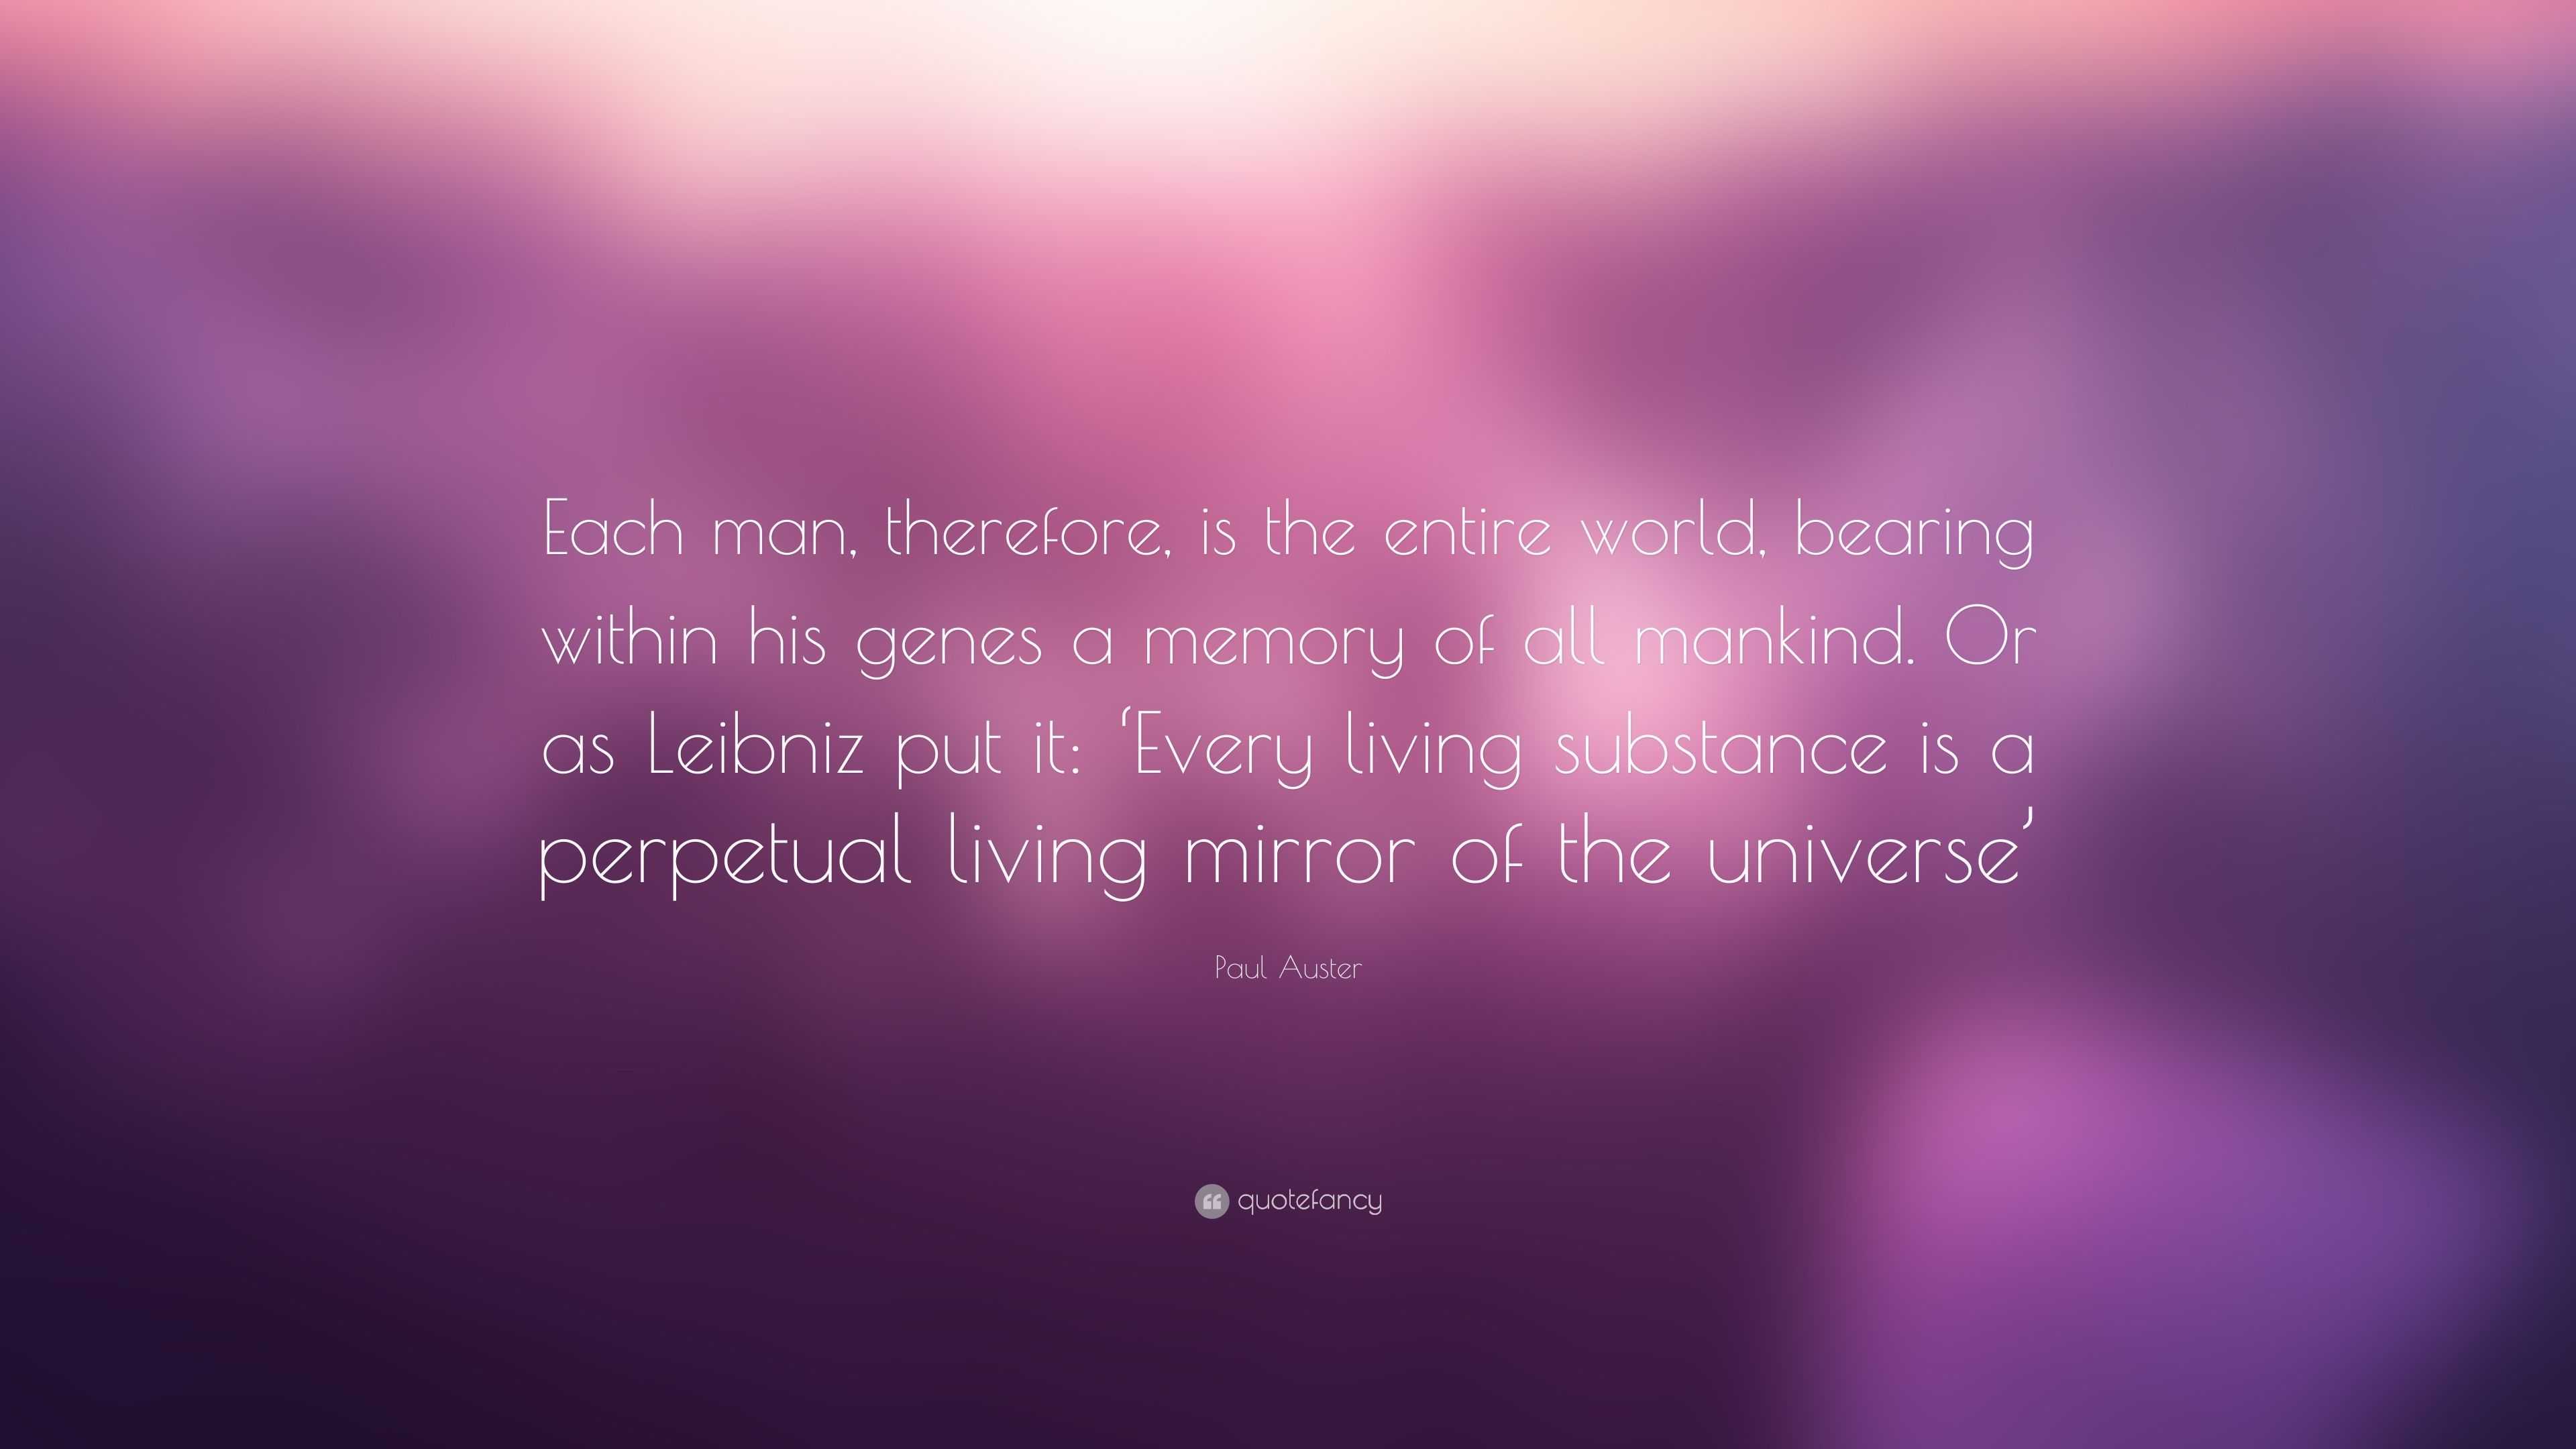 Paul Auster Quote: “Each man, therefore, is the entire world, bearing ...